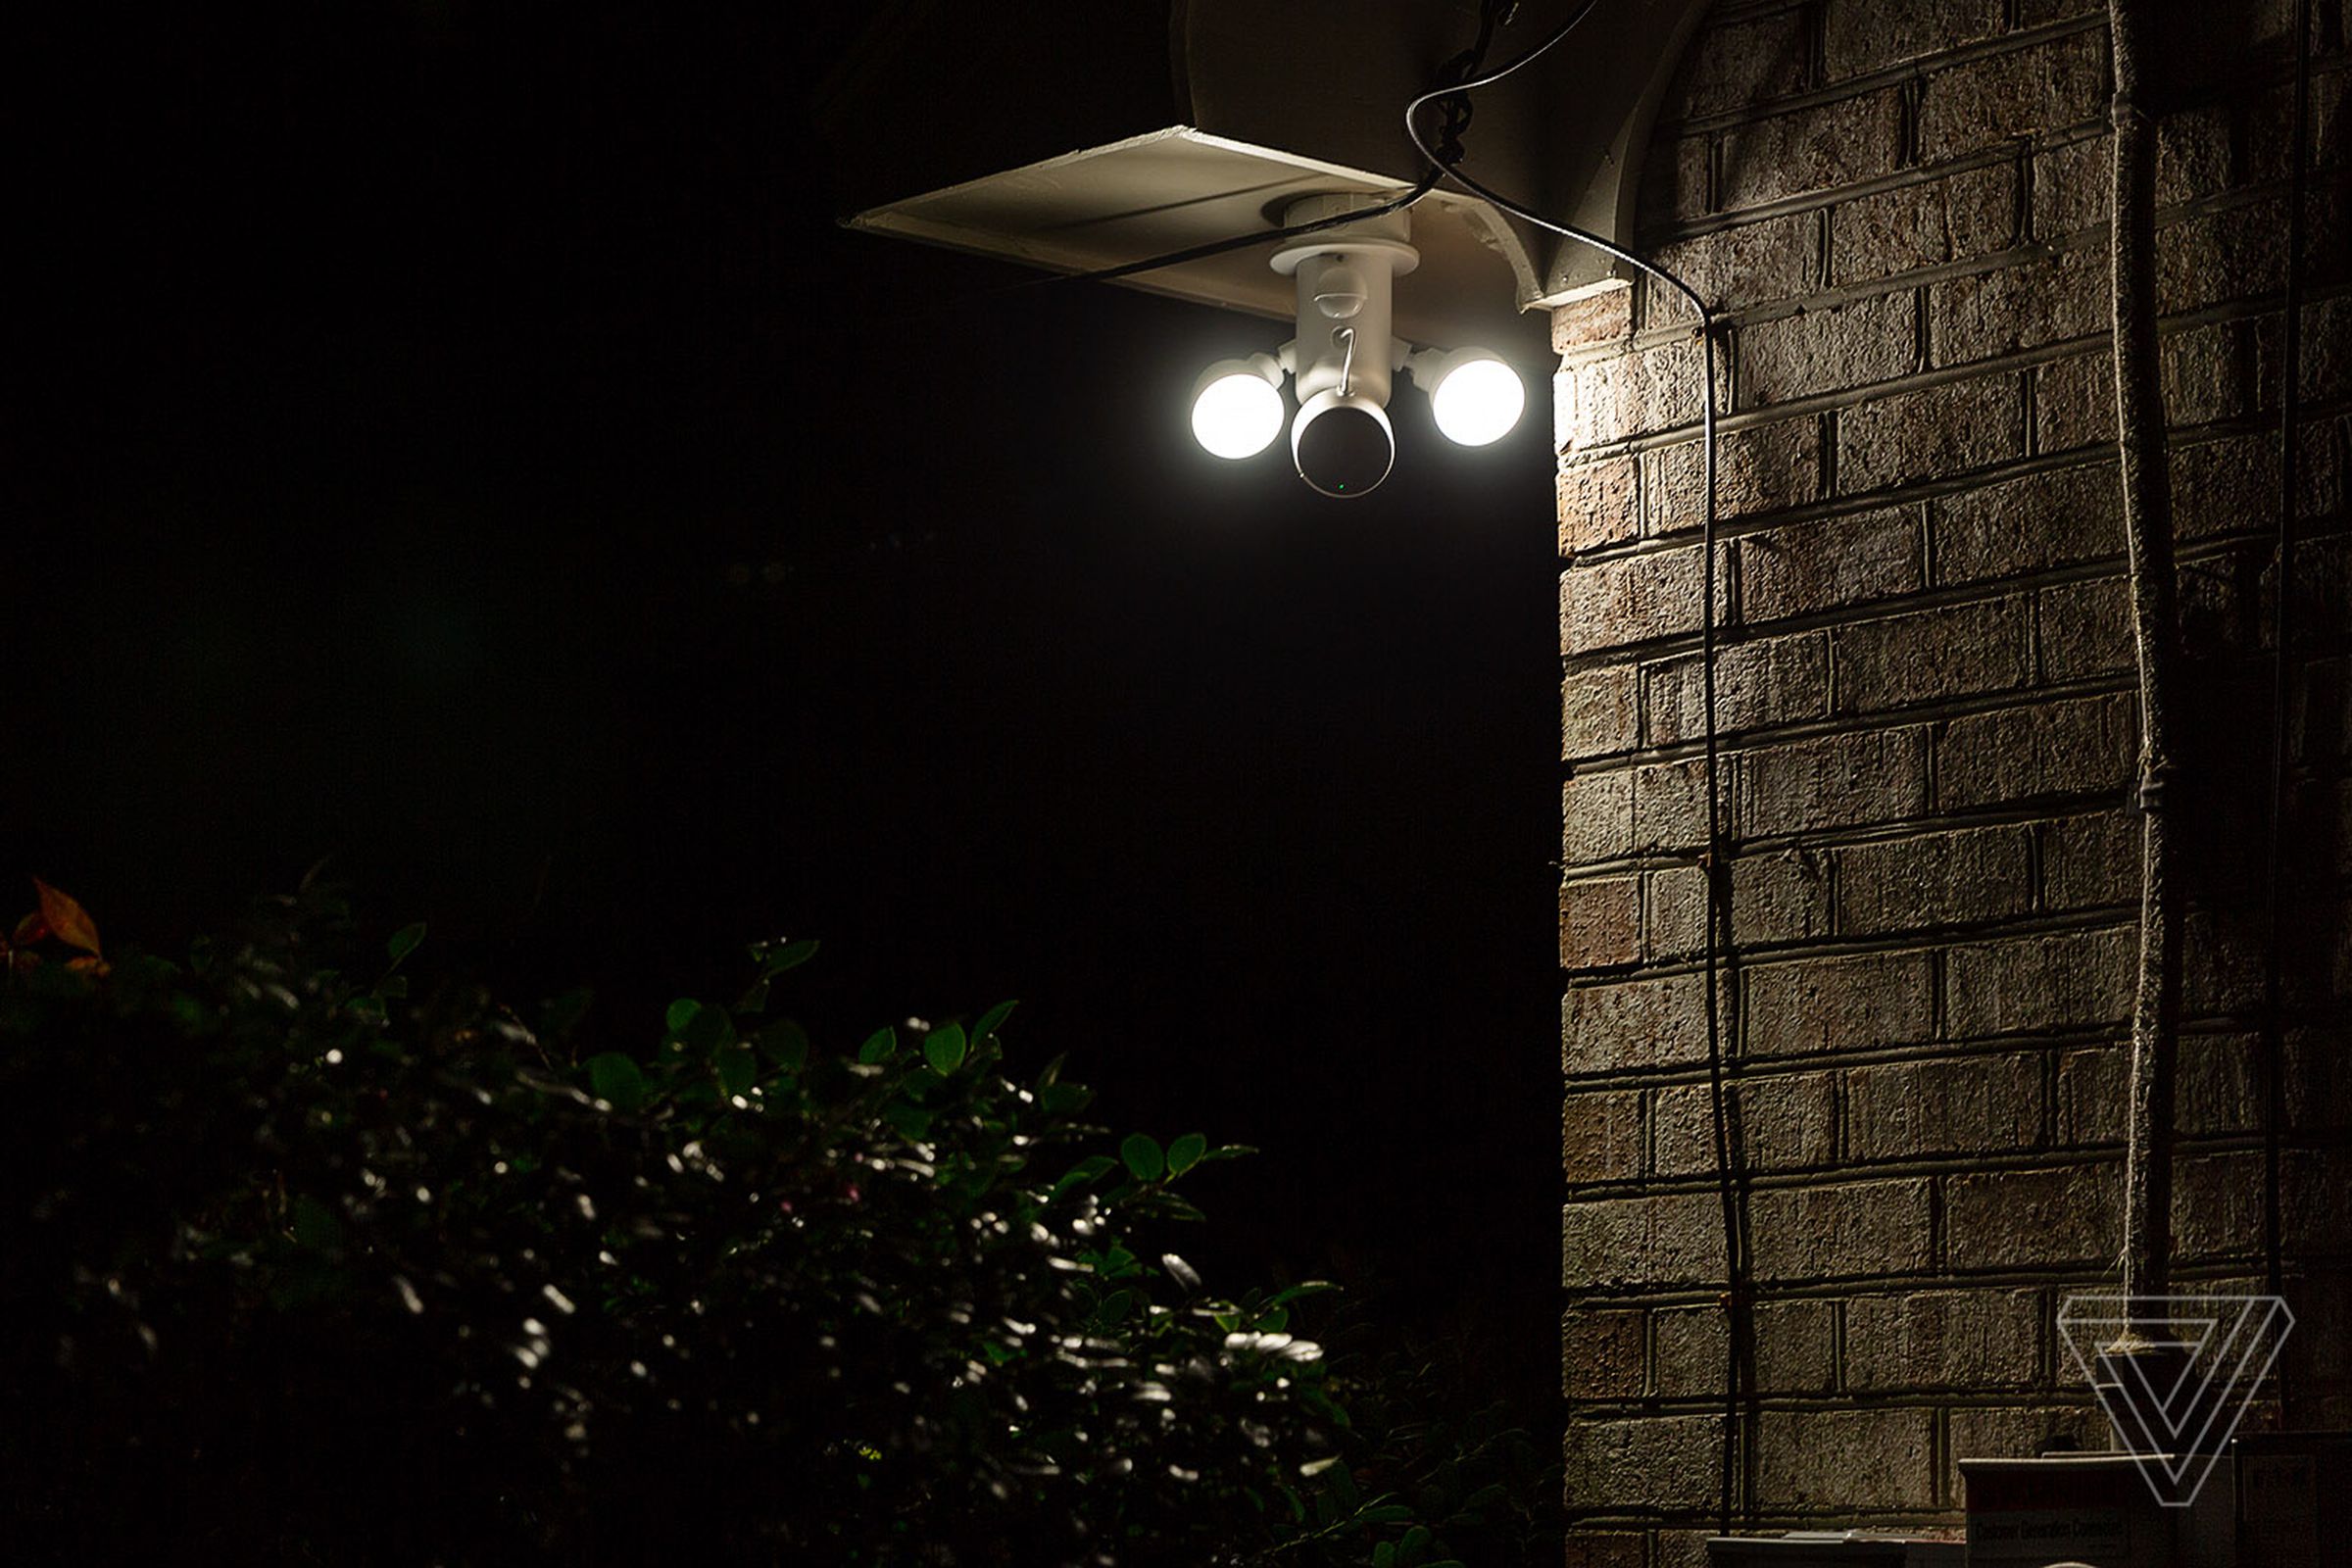 The Google Nest Cam with floodlight is Nest’s first foray into outdoor lighting.